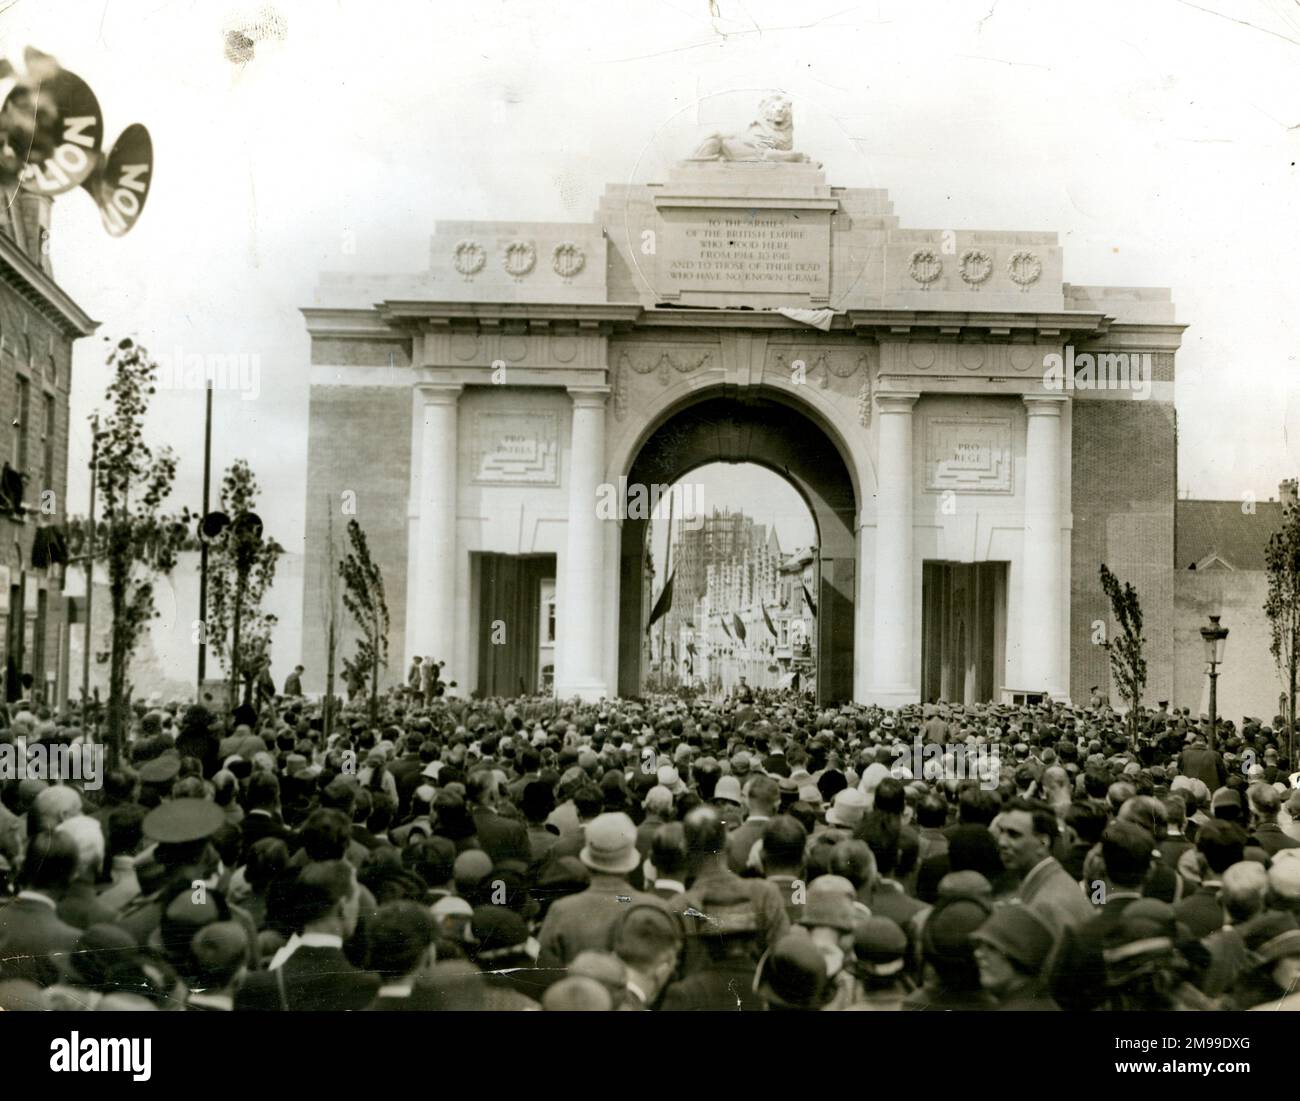 Opening ceremony of the Menin Gate, Ypres, Belgium, by Field Marshal Lord Plumer, 24 July 1927. Stock Photo